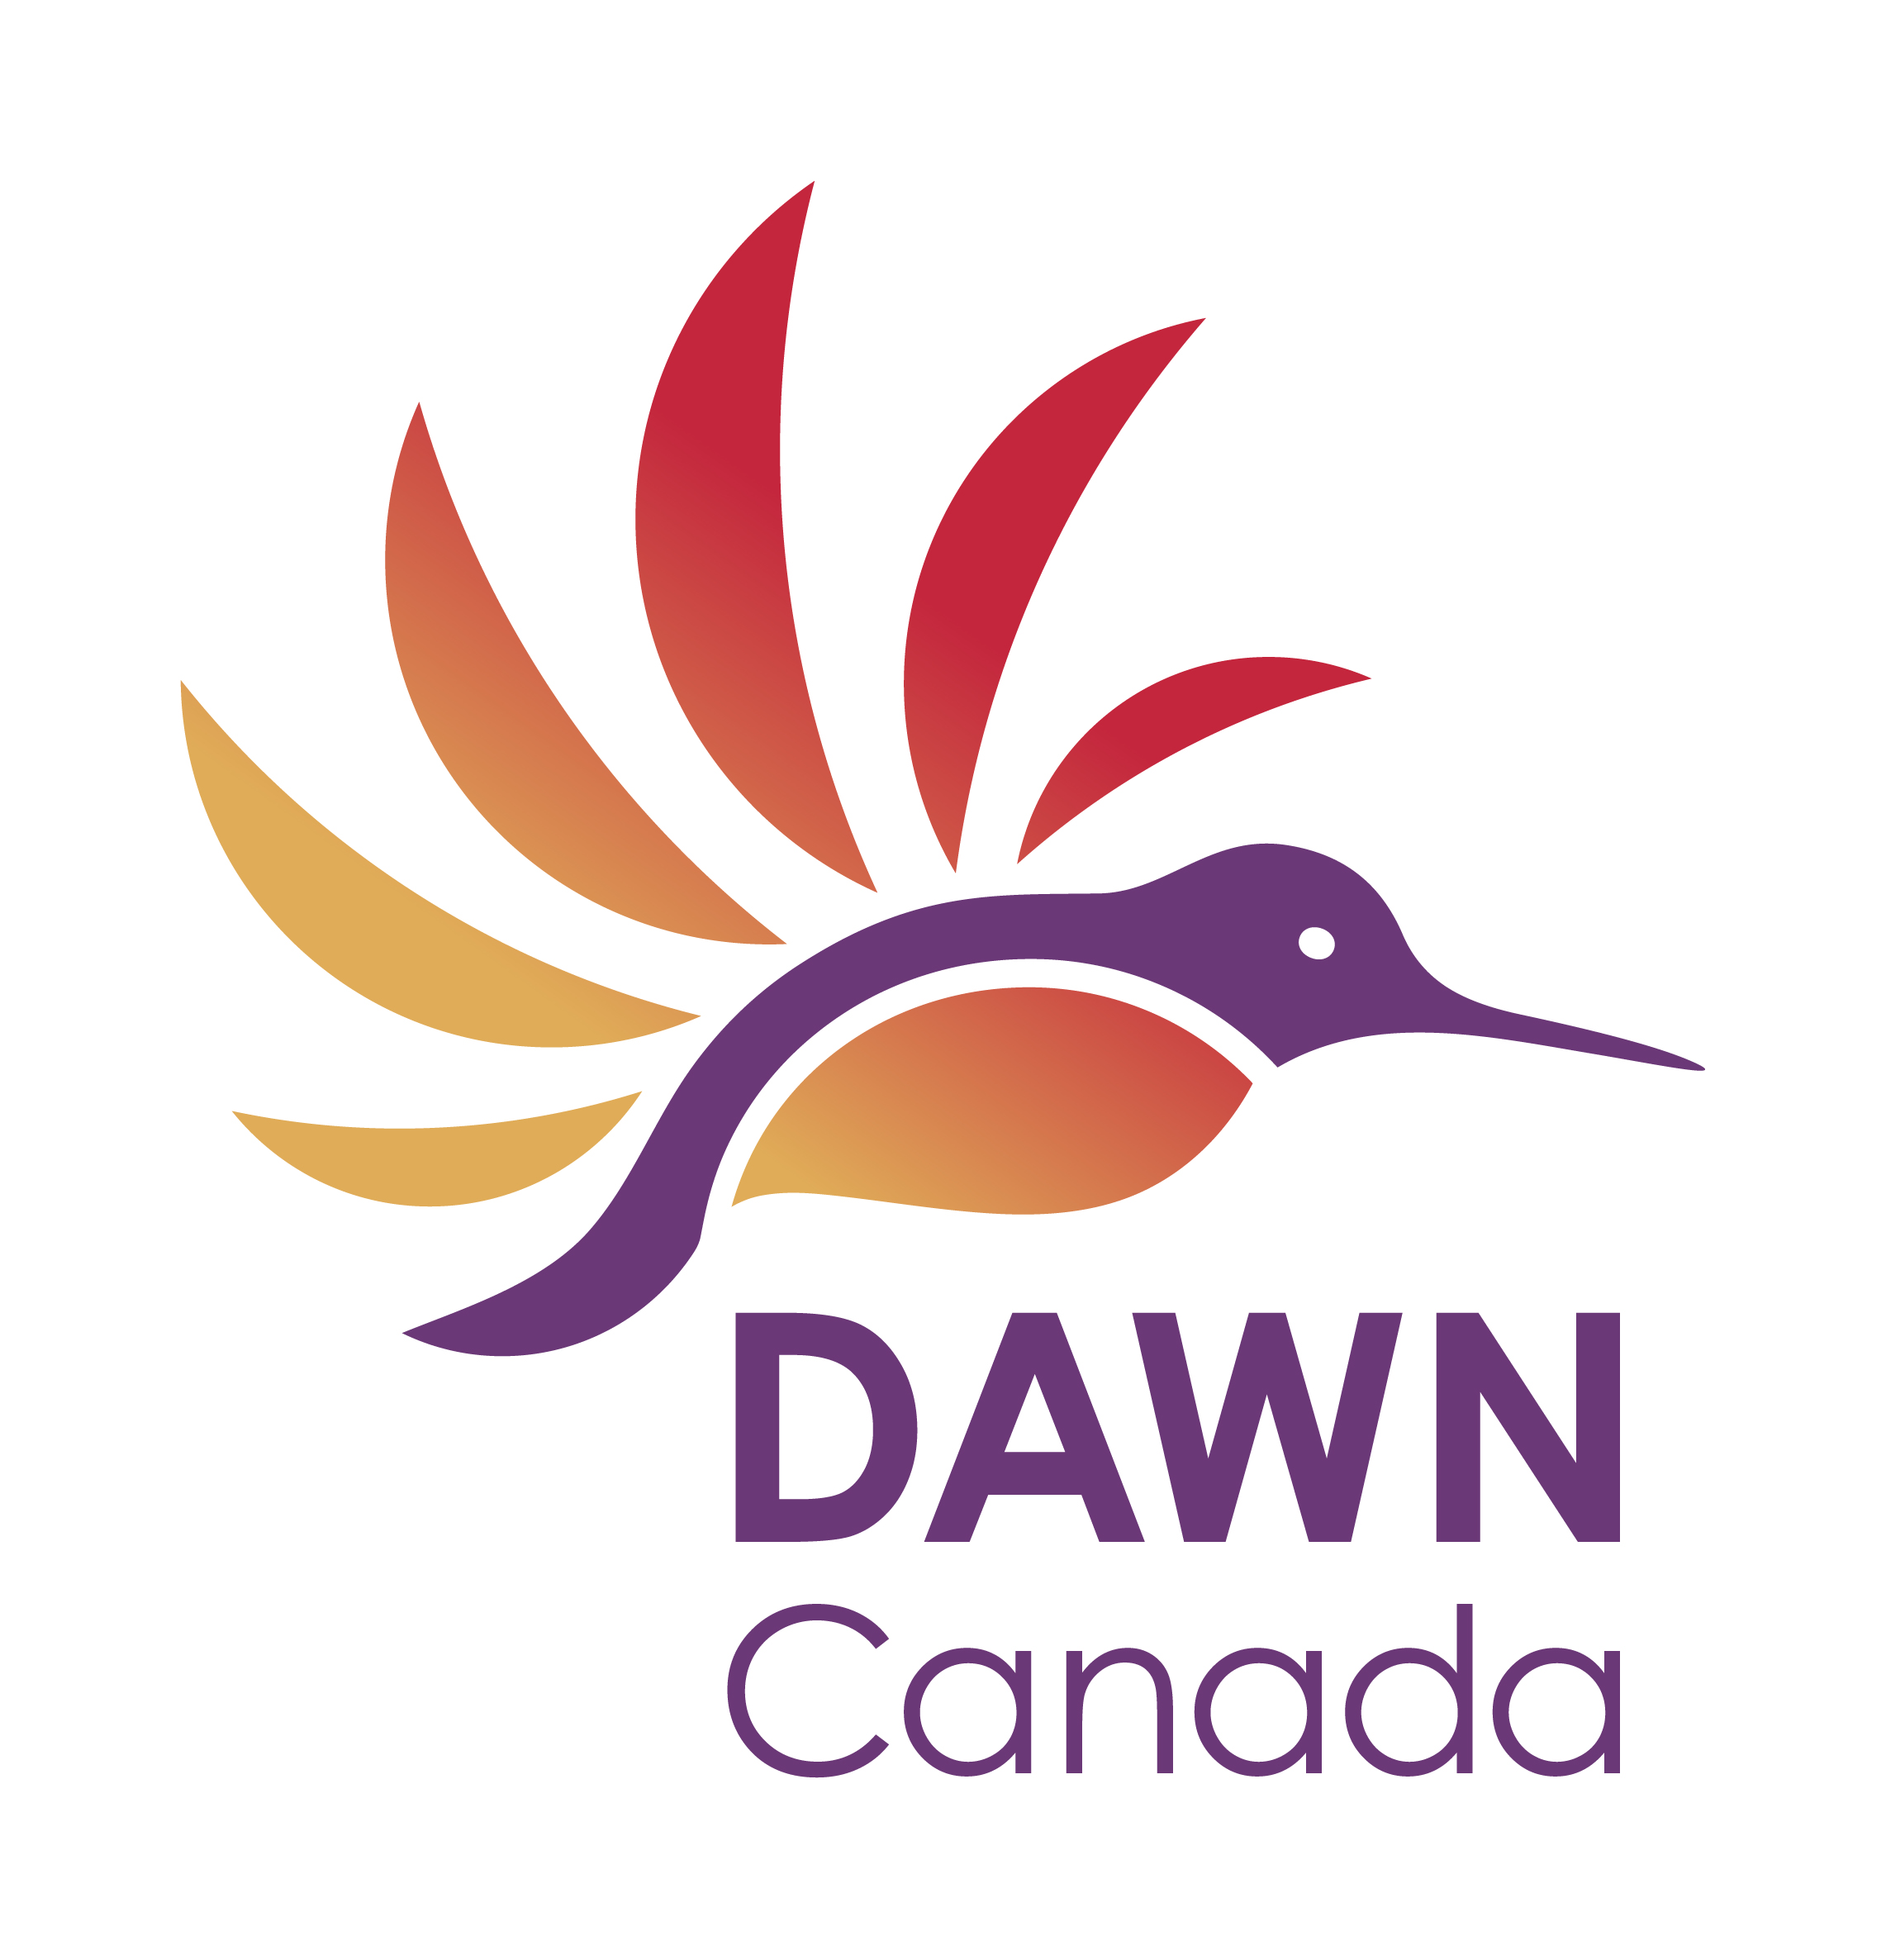 The DAWN Canada logo, a purple hummingbird with a red and yellow gradient belly and wings that form the sun.